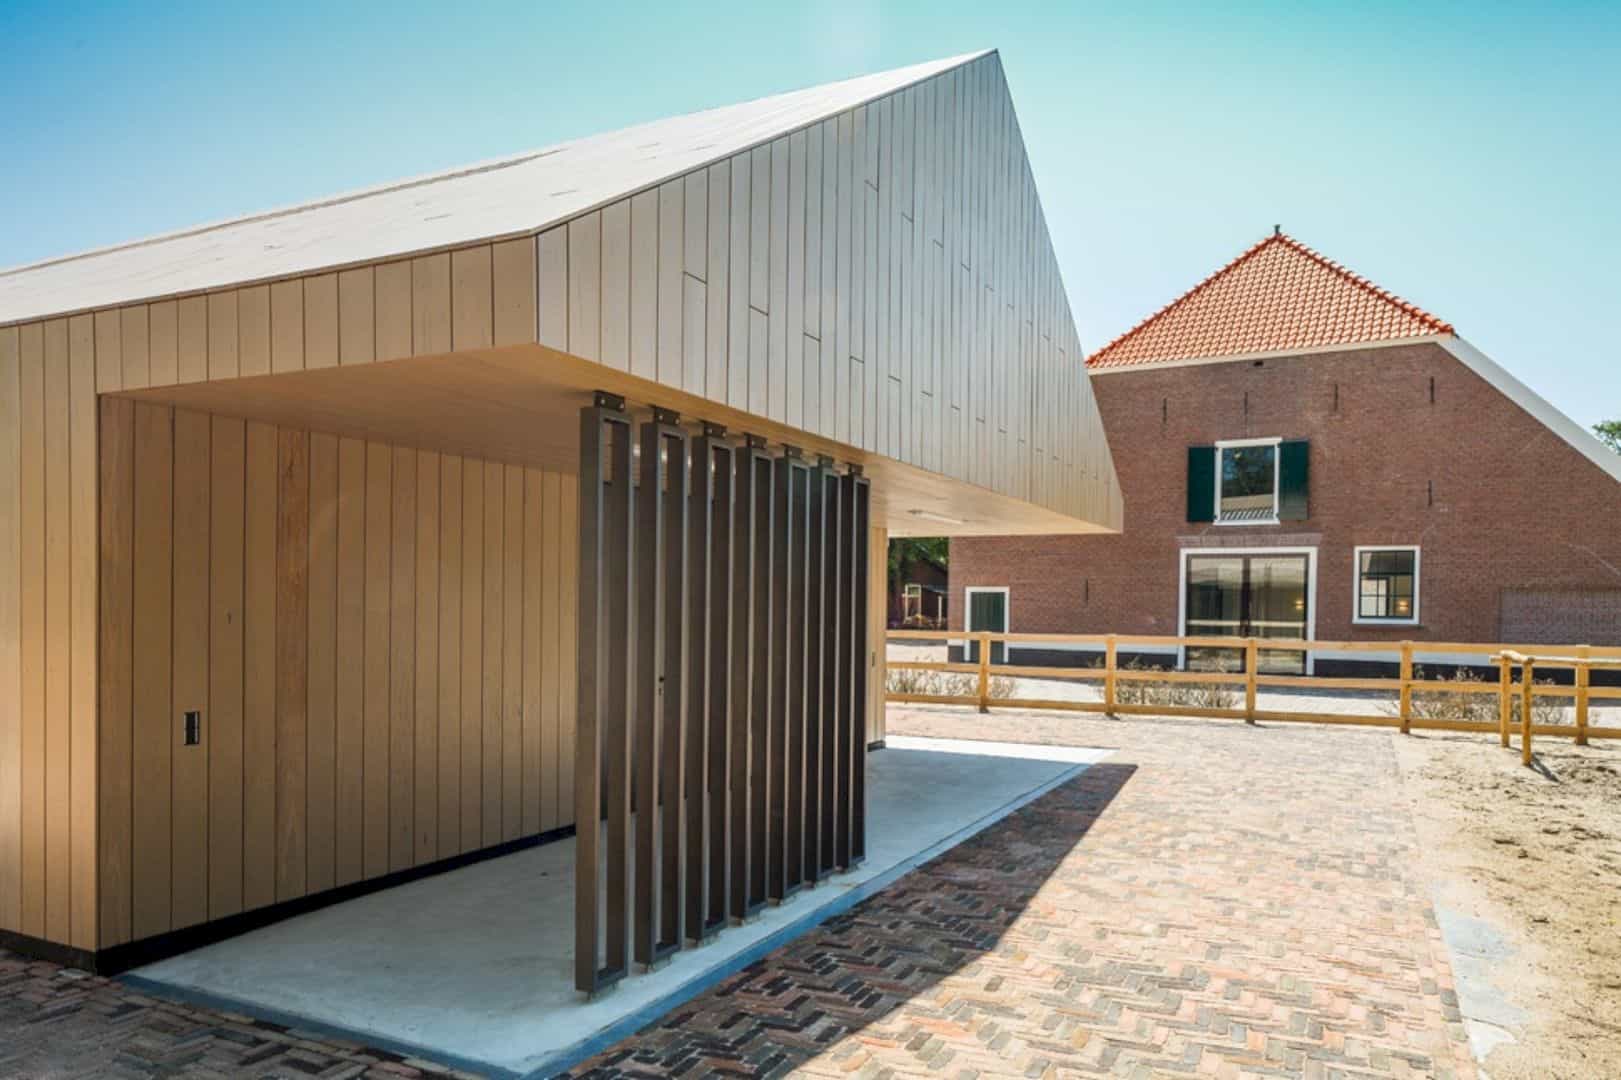 Meijendel Visitors Center & Stables Designing A New Stable In Style 2